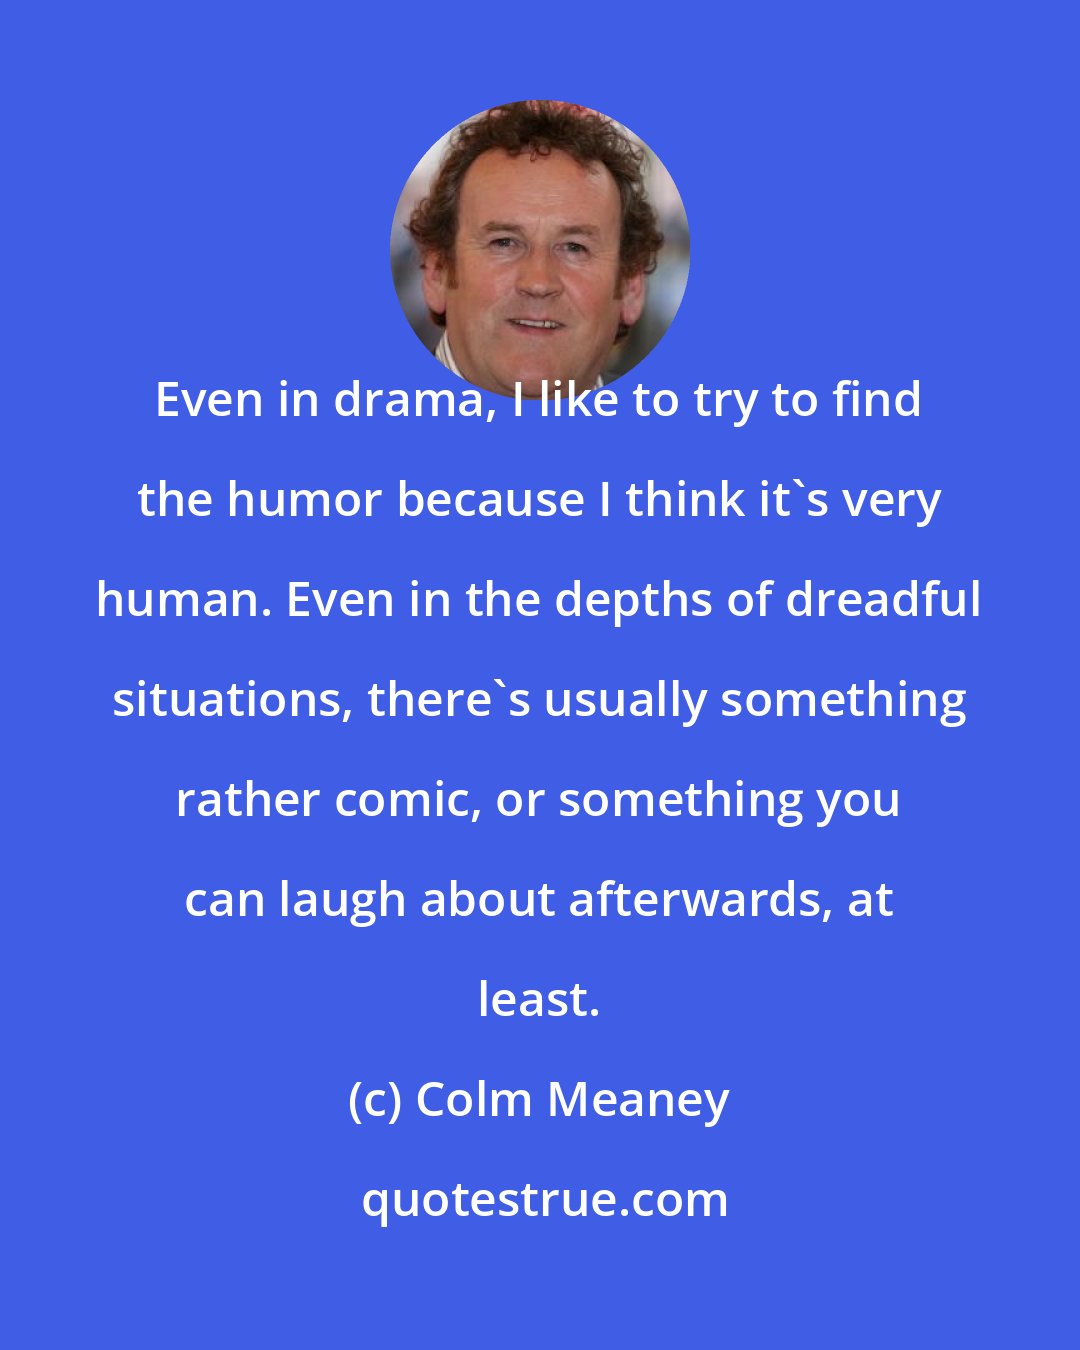 Colm Meaney: Even in drama, I like to try to find the humor because I think it's very human. Even in the depths of dreadful situations, there's usually something rather comic, or something you can laugh about afterwards, at least.